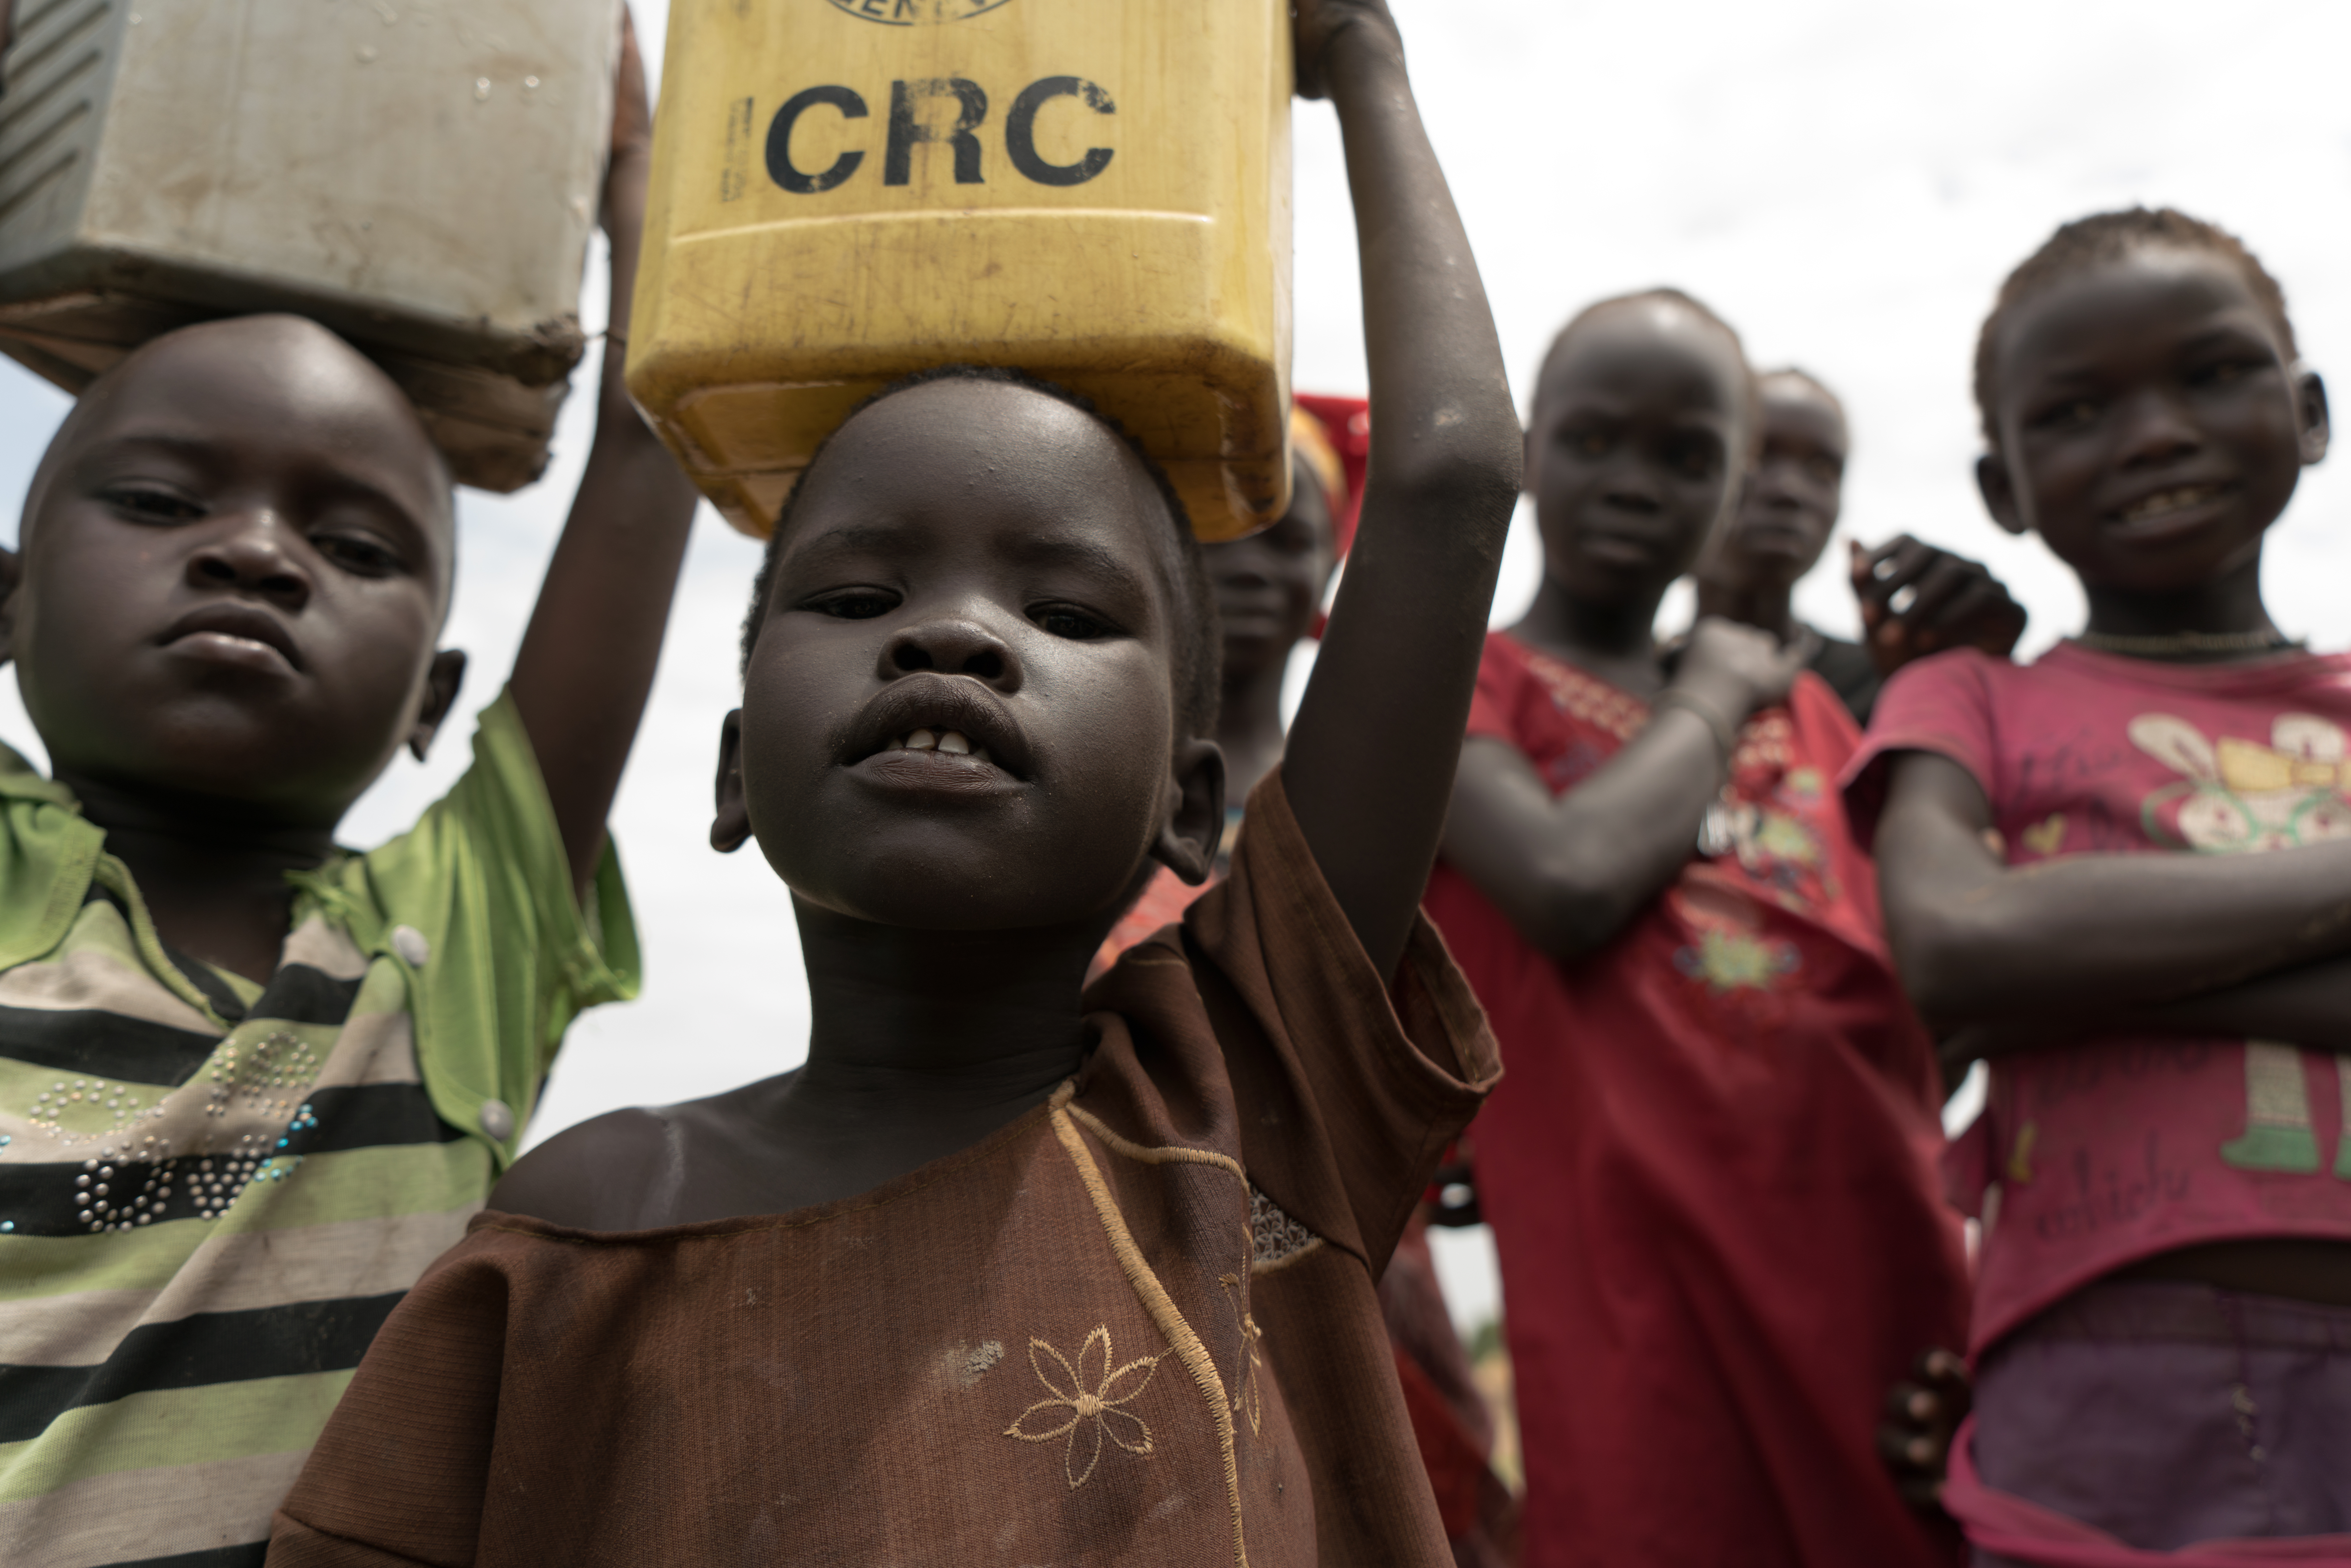 A Story of Hope for South Sudan’s 5th Birthday